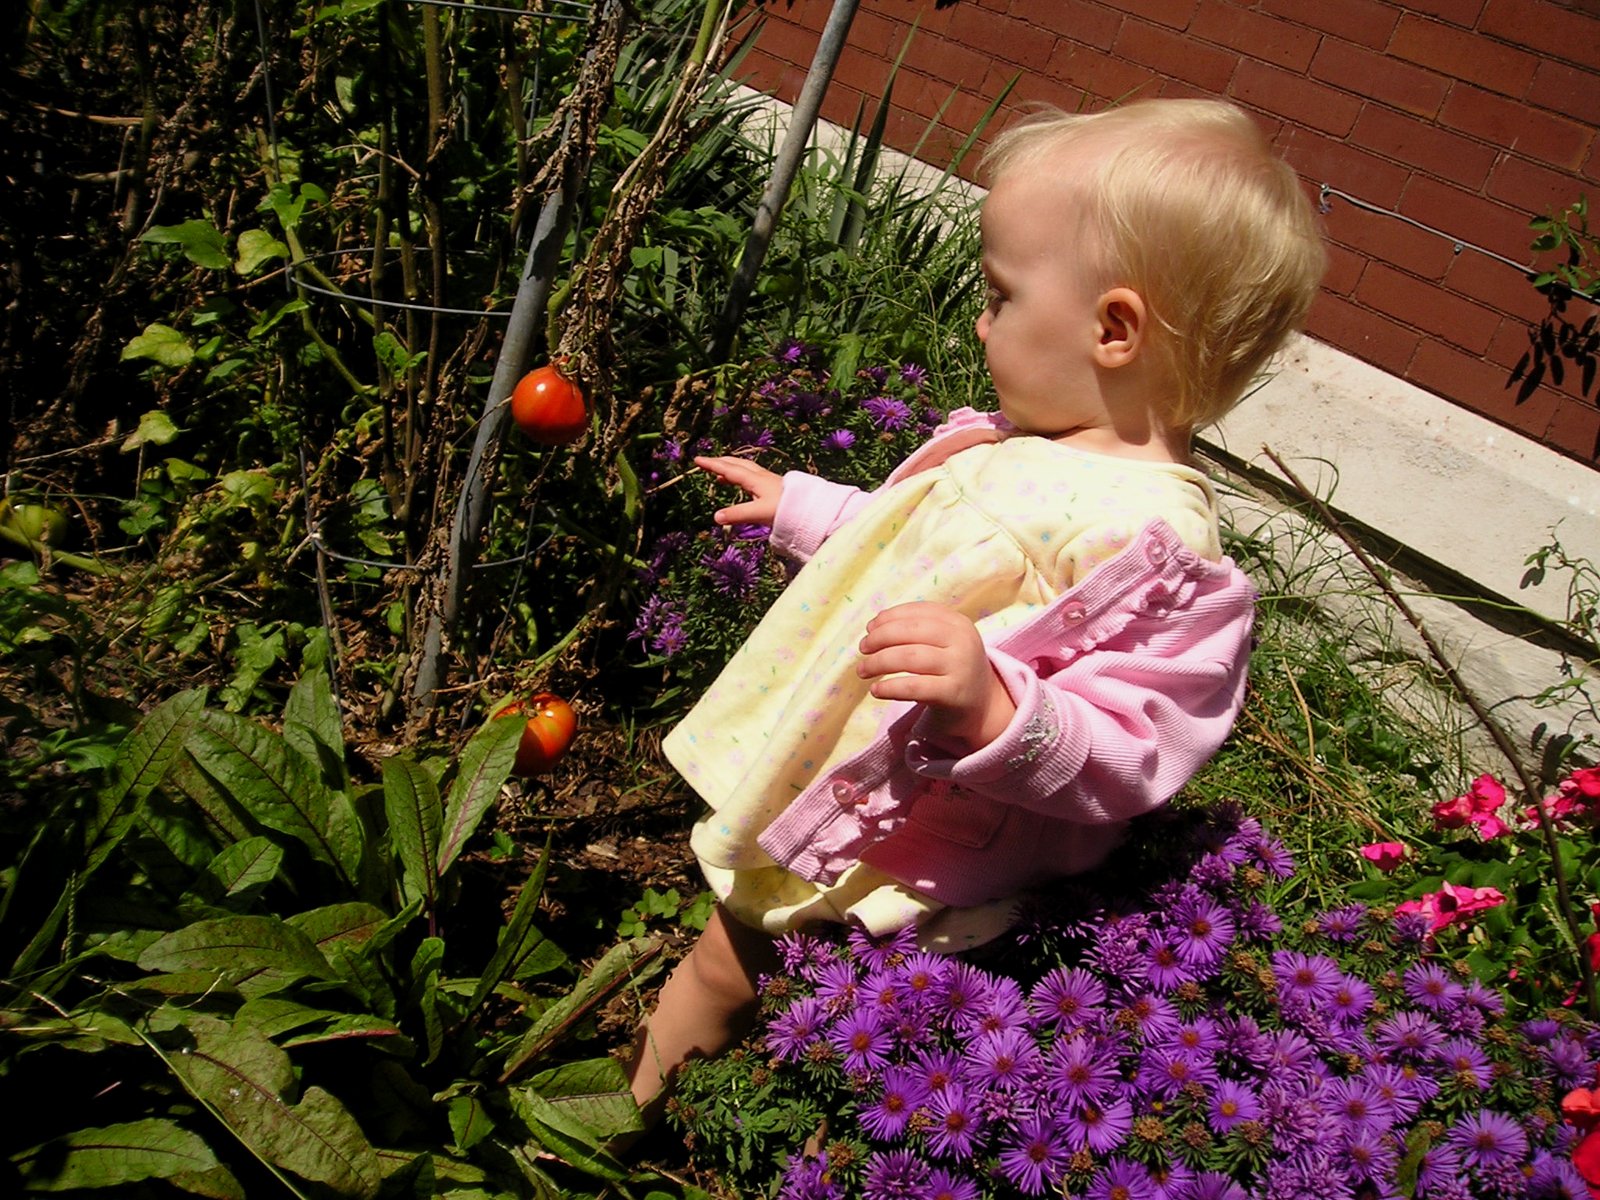 a baby sitting on the ground by flowers